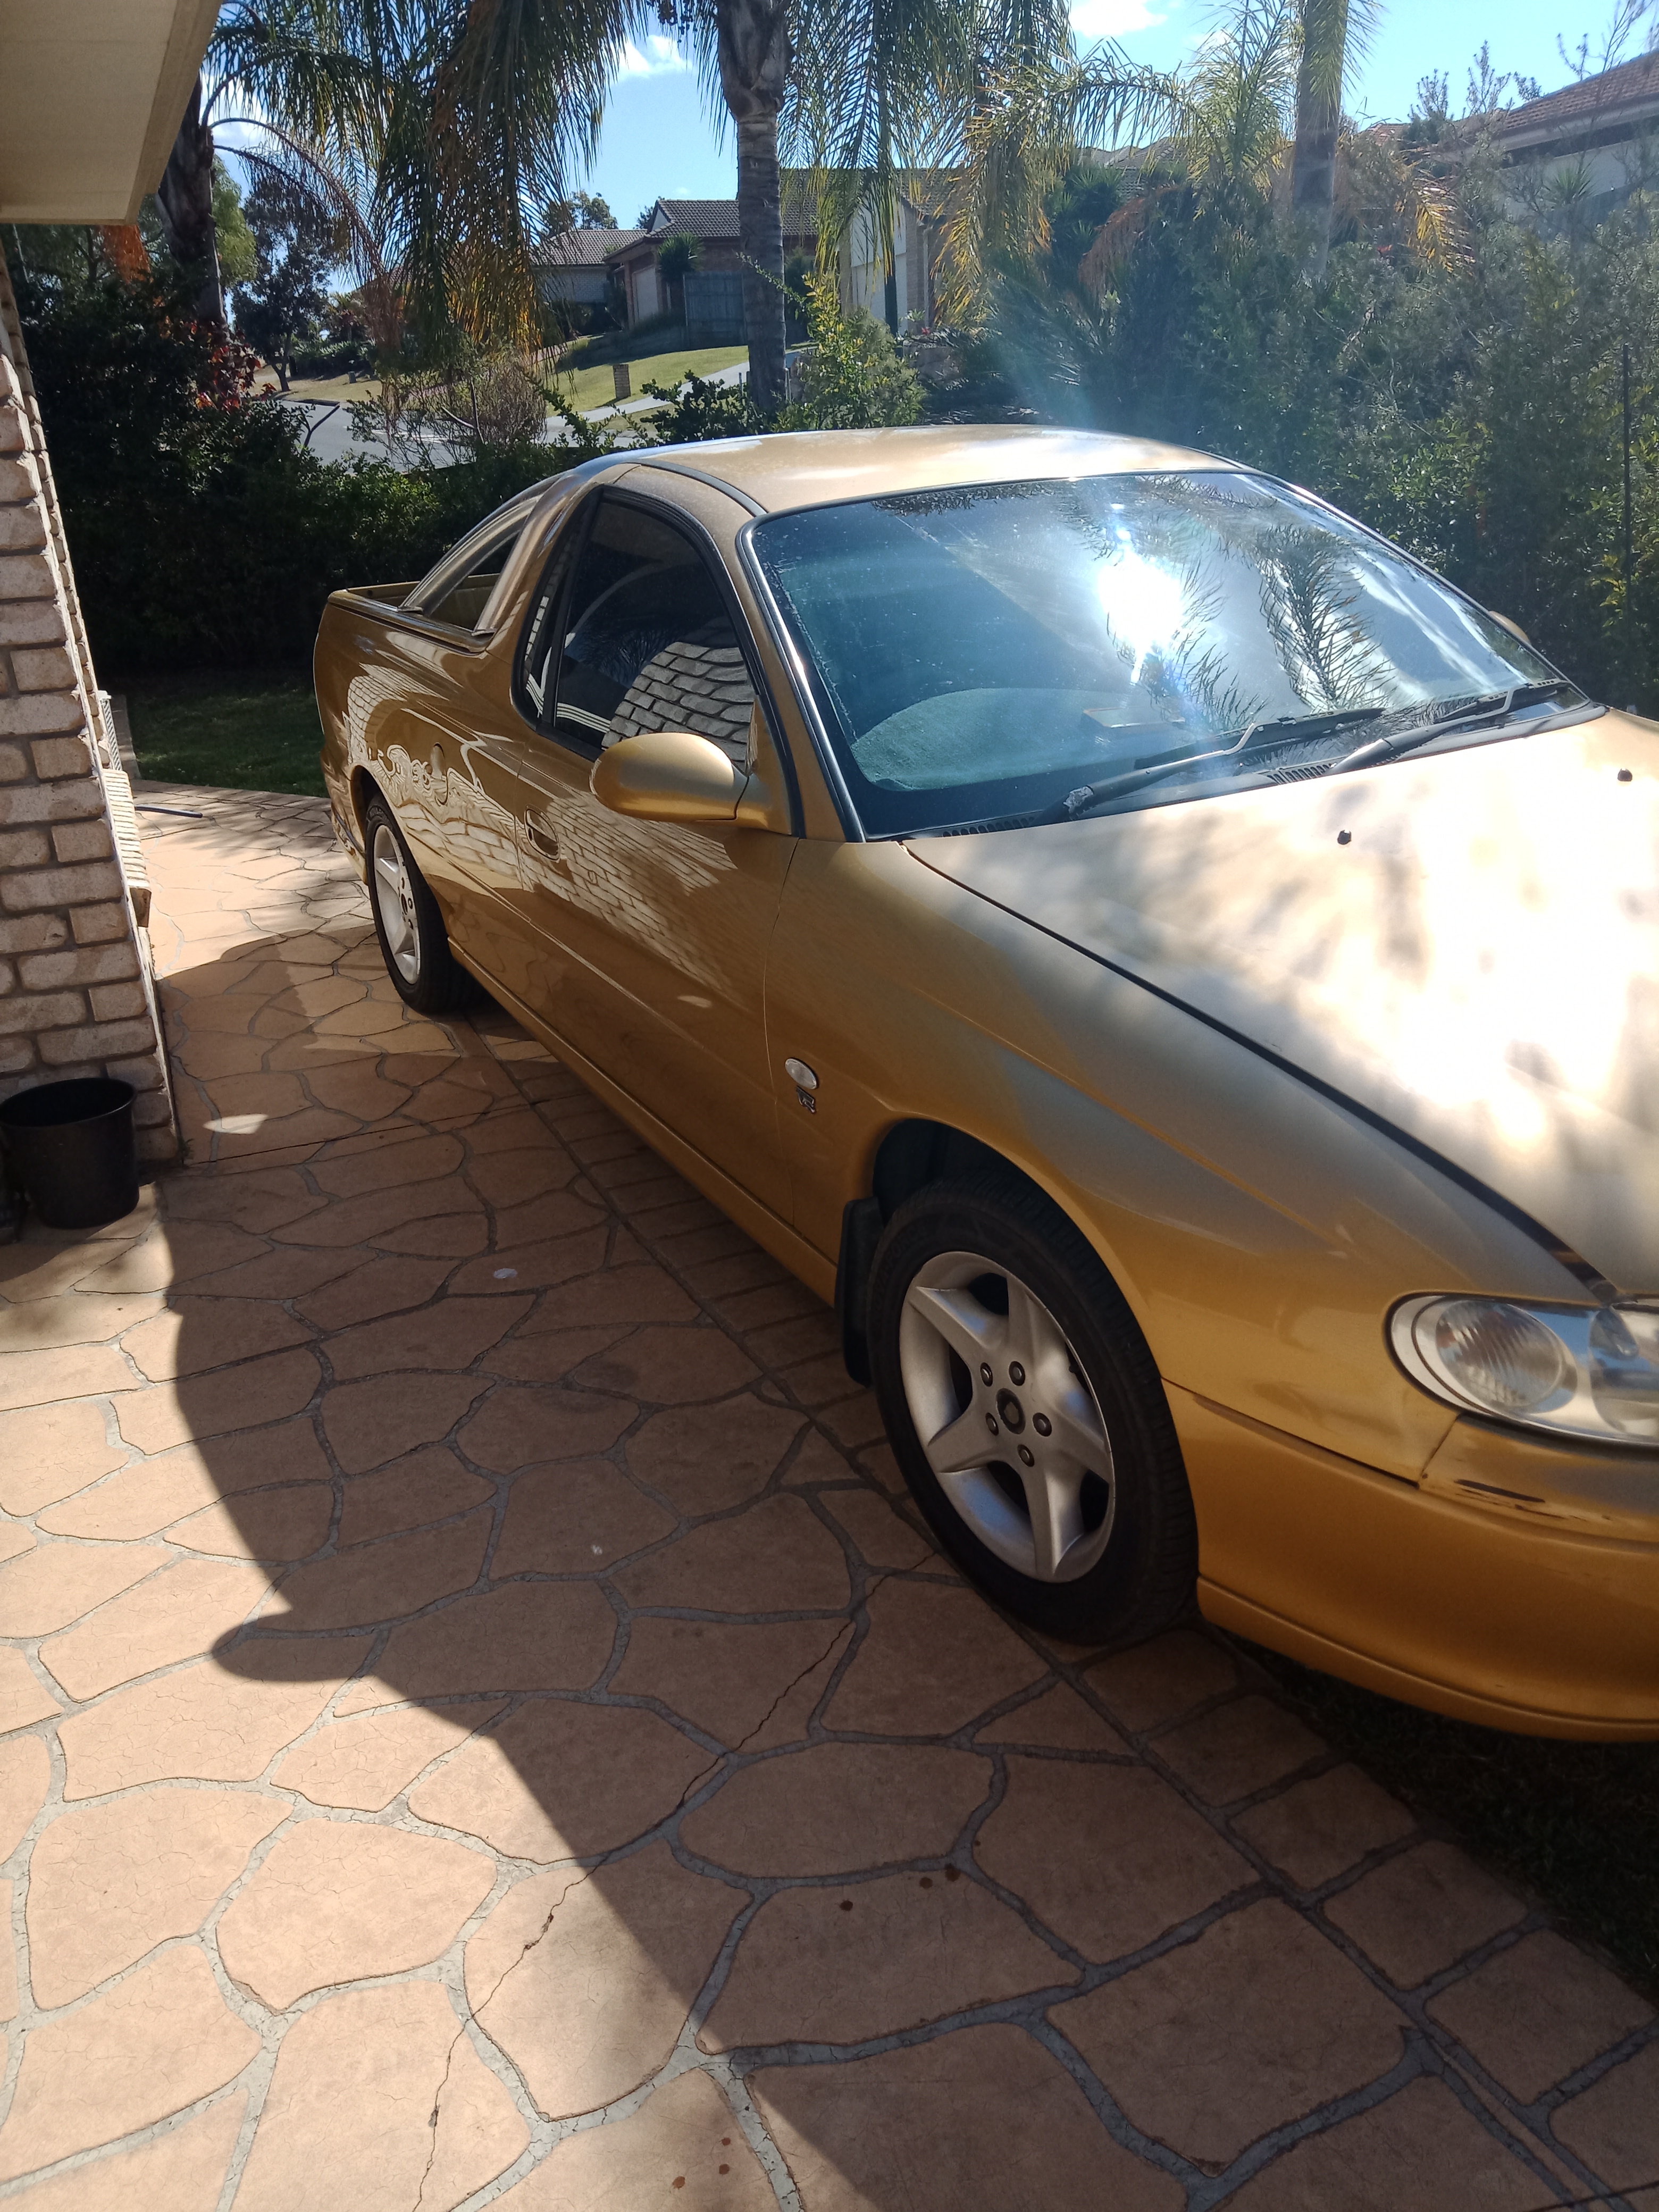 2001 Holden Commodore Equipe VYII